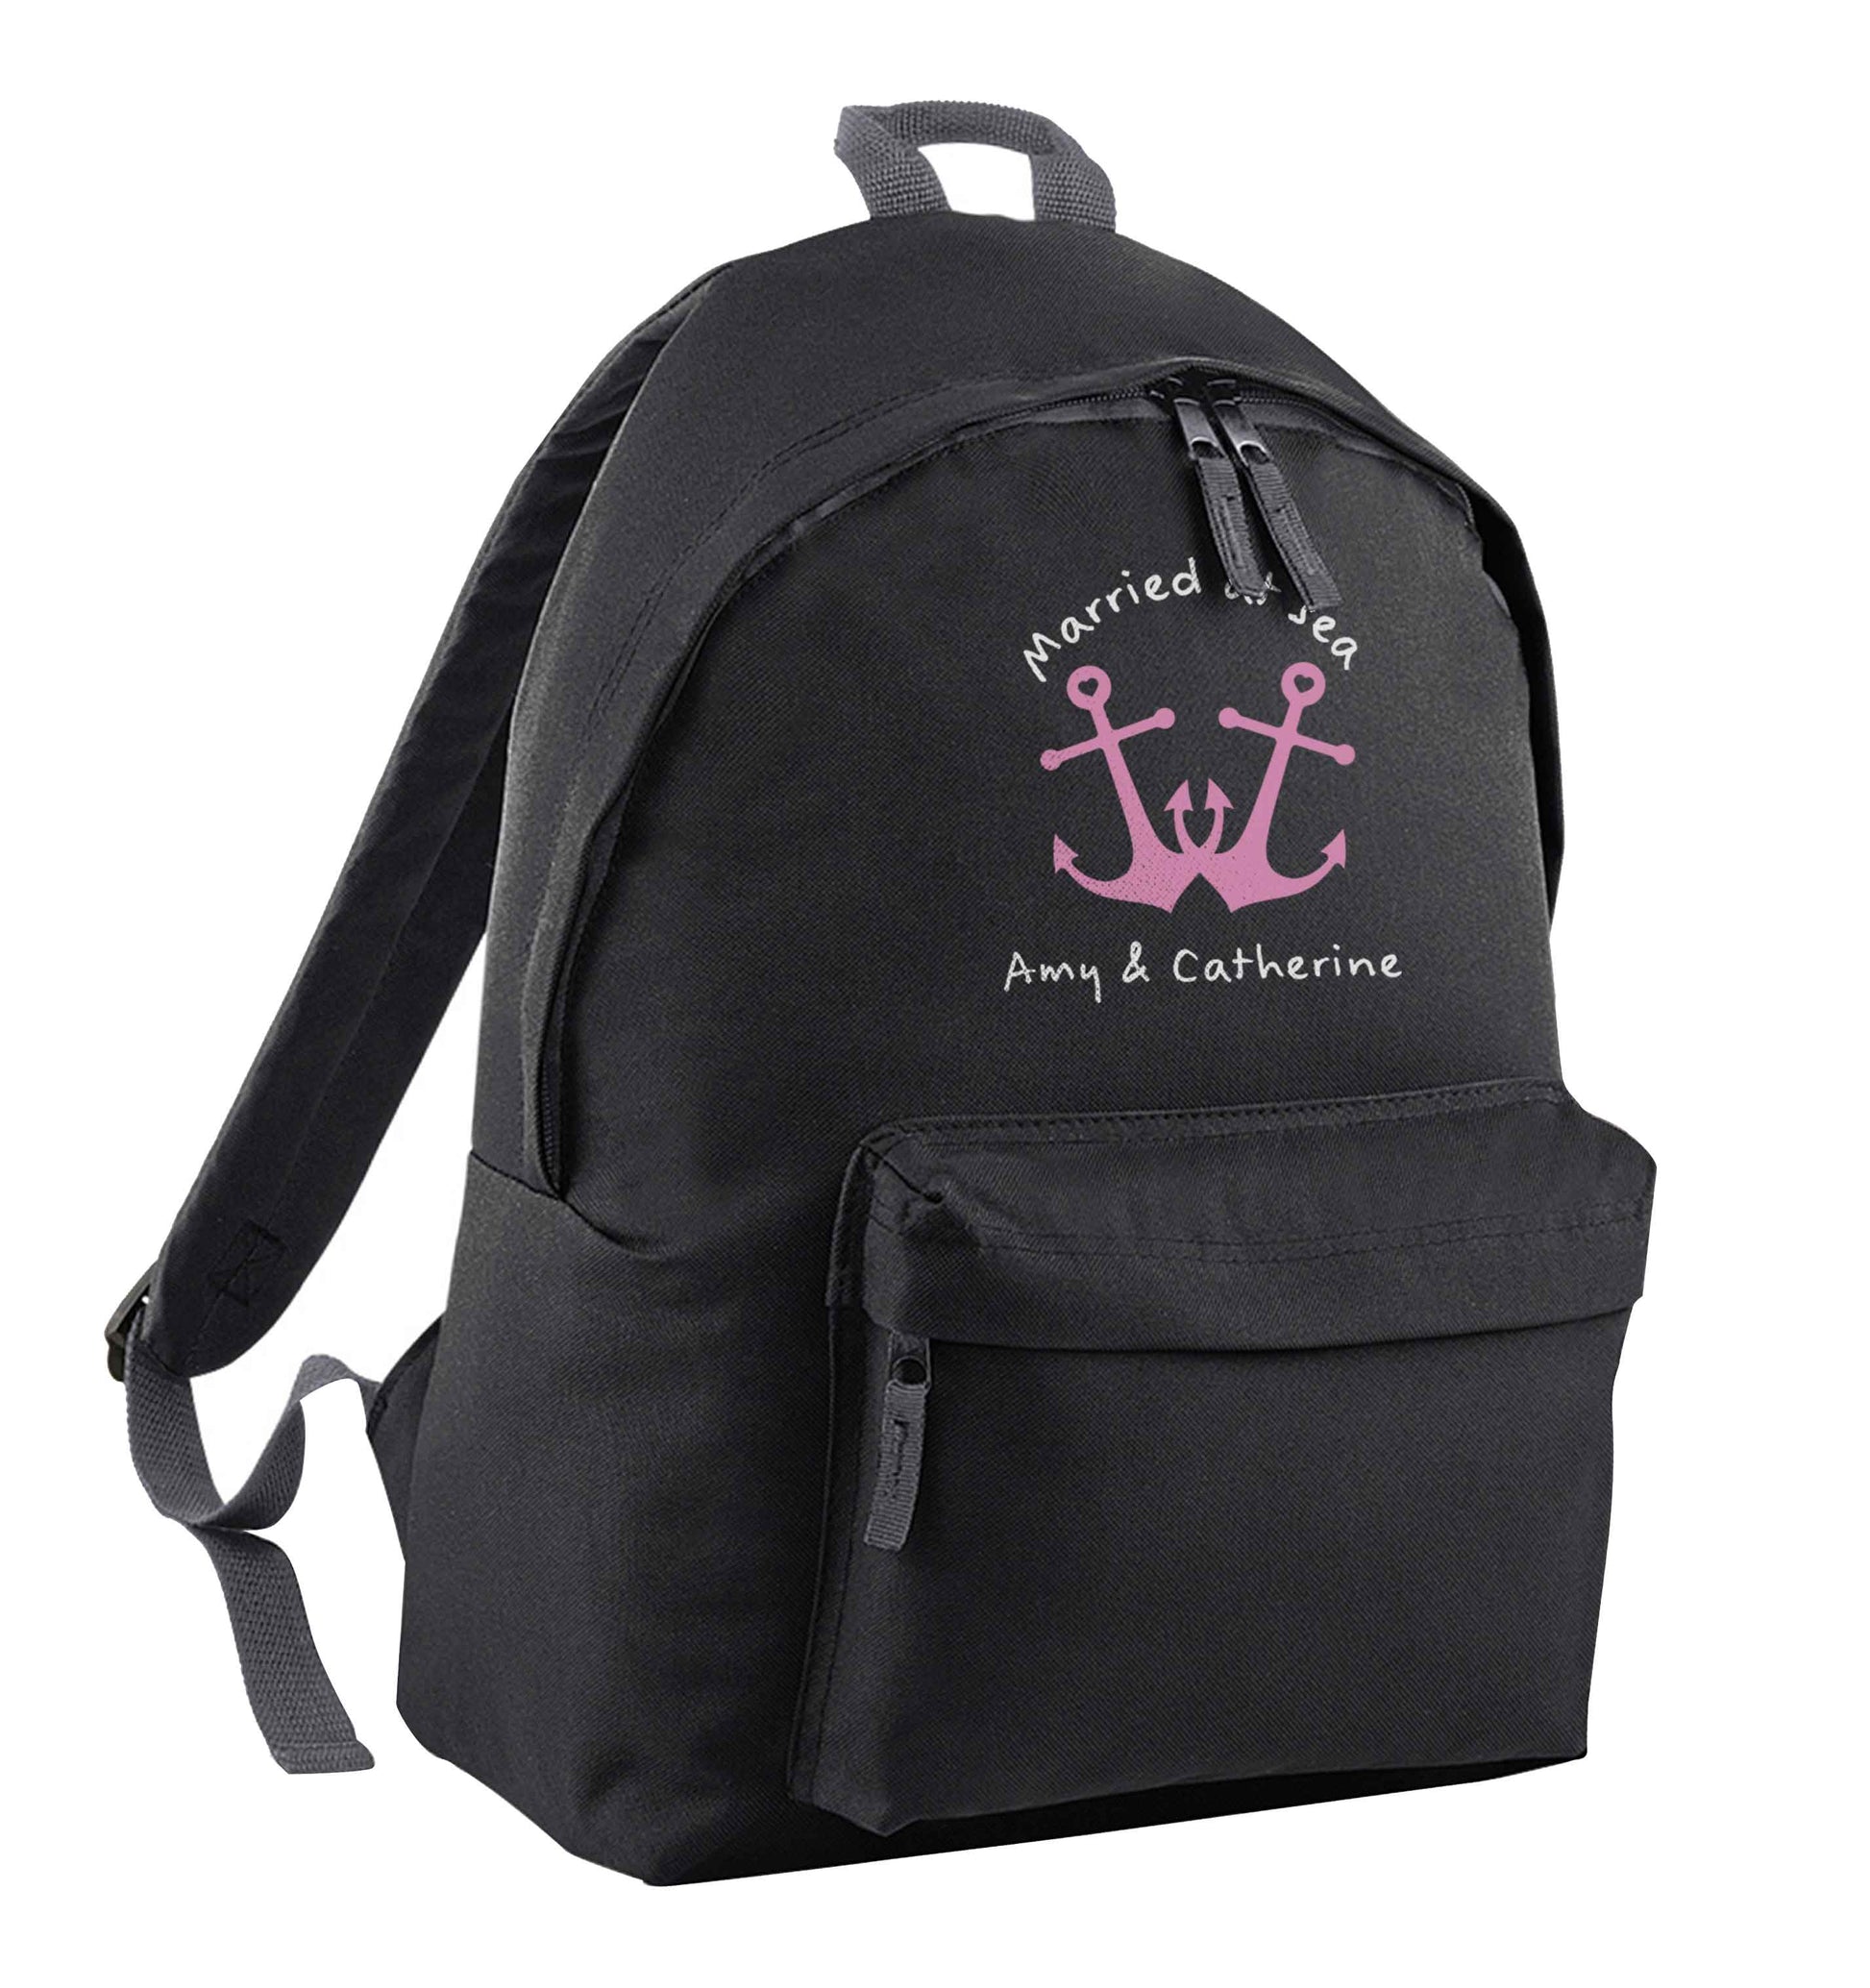 Married at sea pink anchors black adults backpack